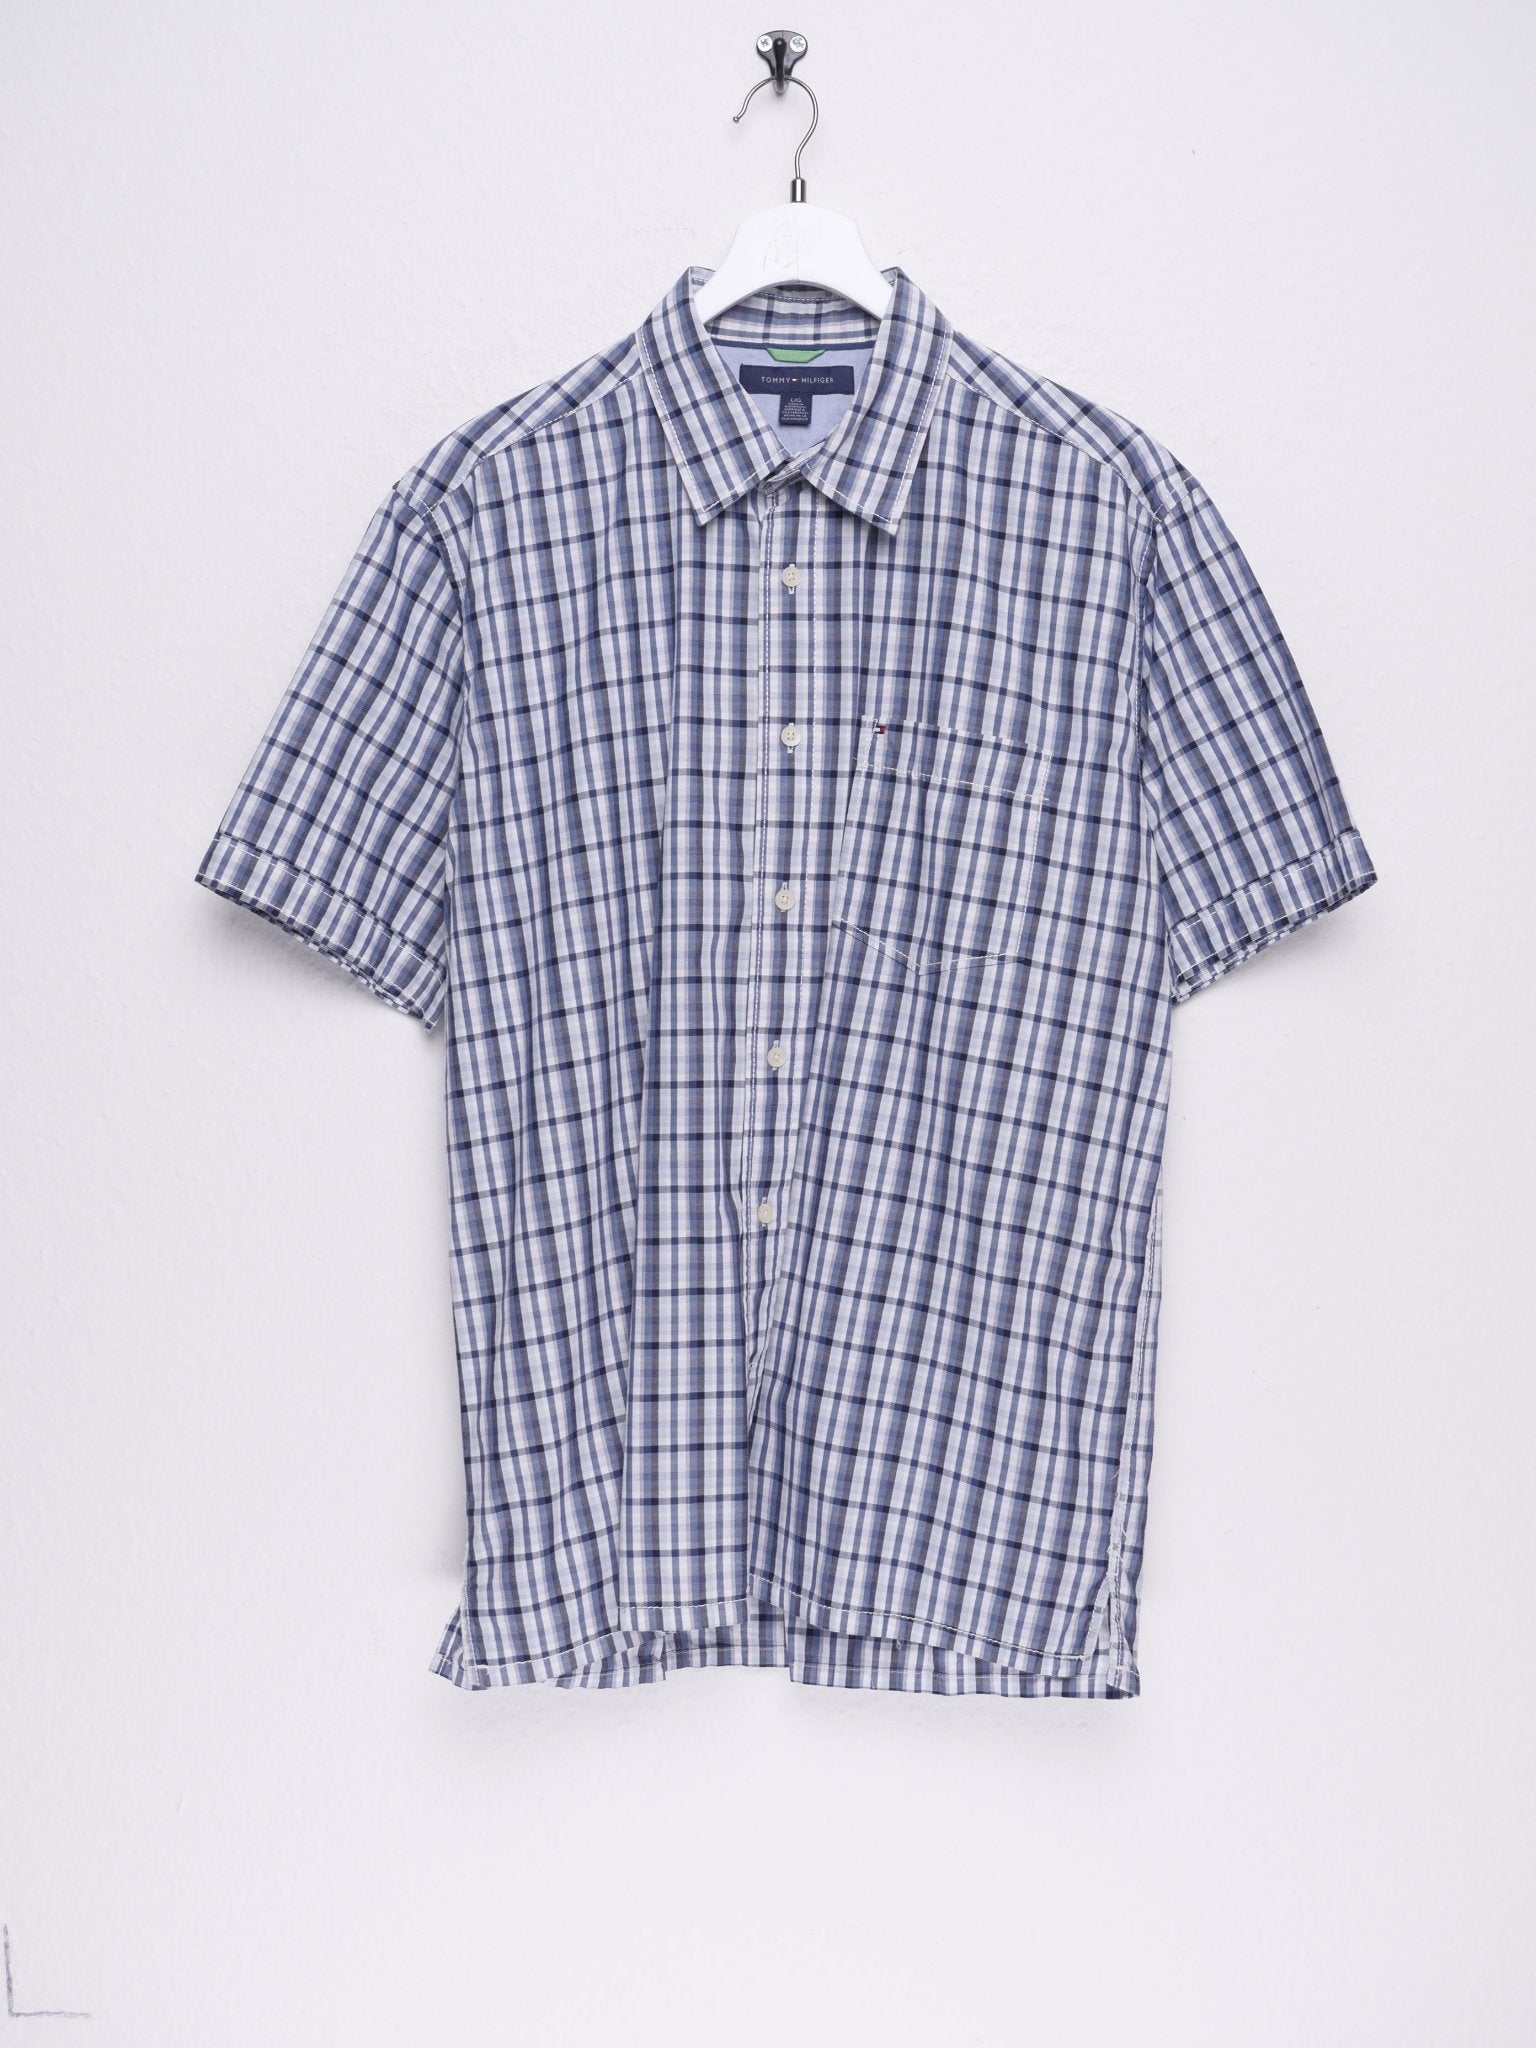 Tommy Hilfiger embroidered Logo checkered S/S Button Down - Peeces